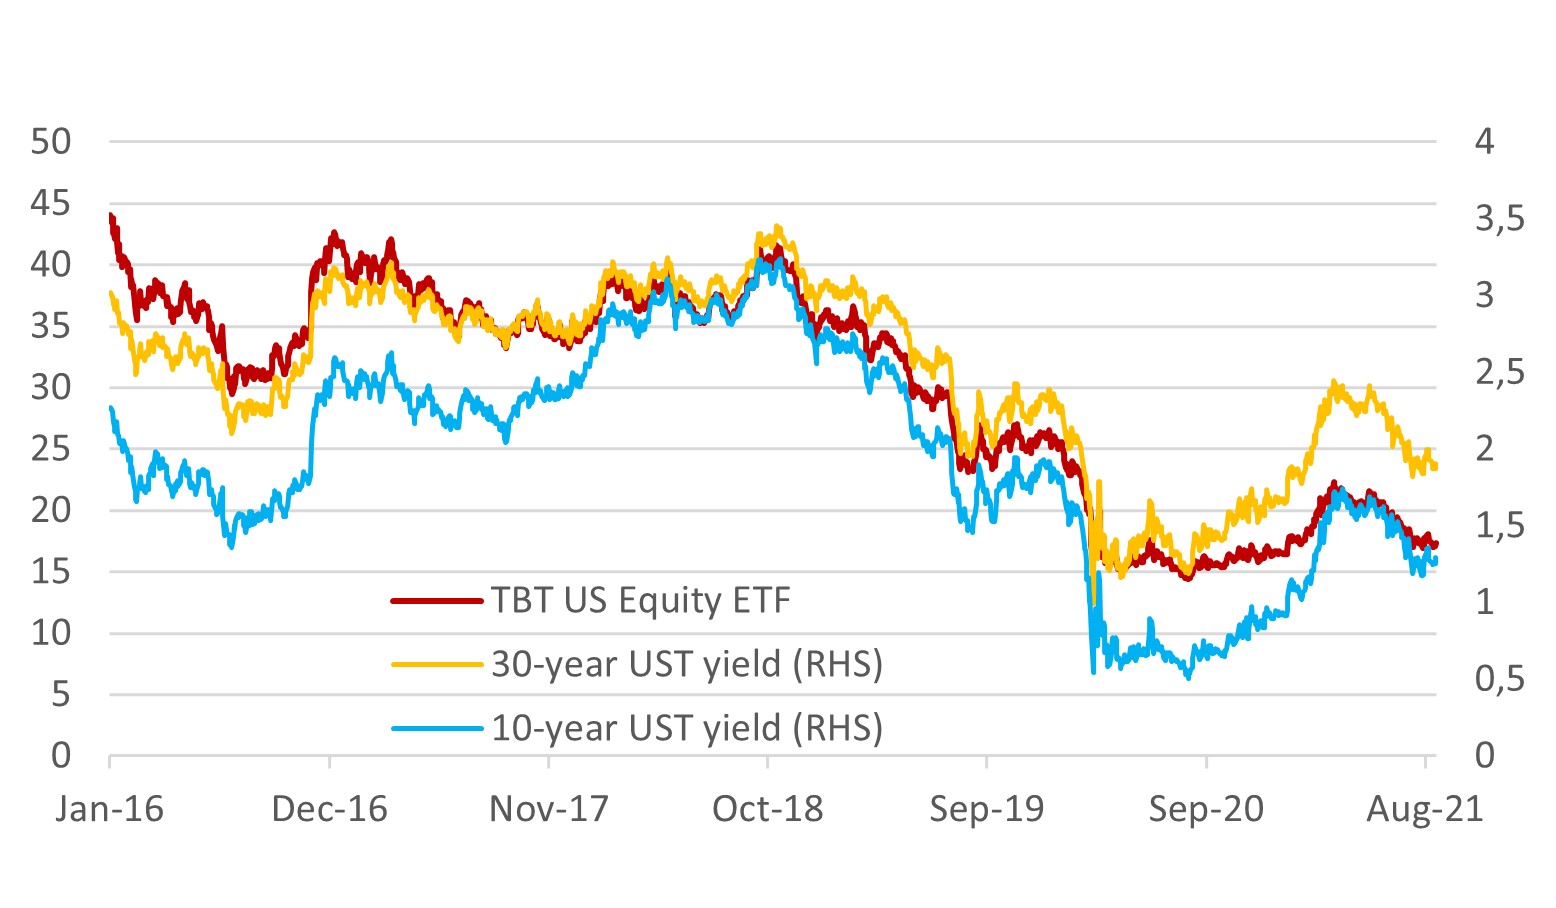 10y and 30y UST yields, TBТ US ETF